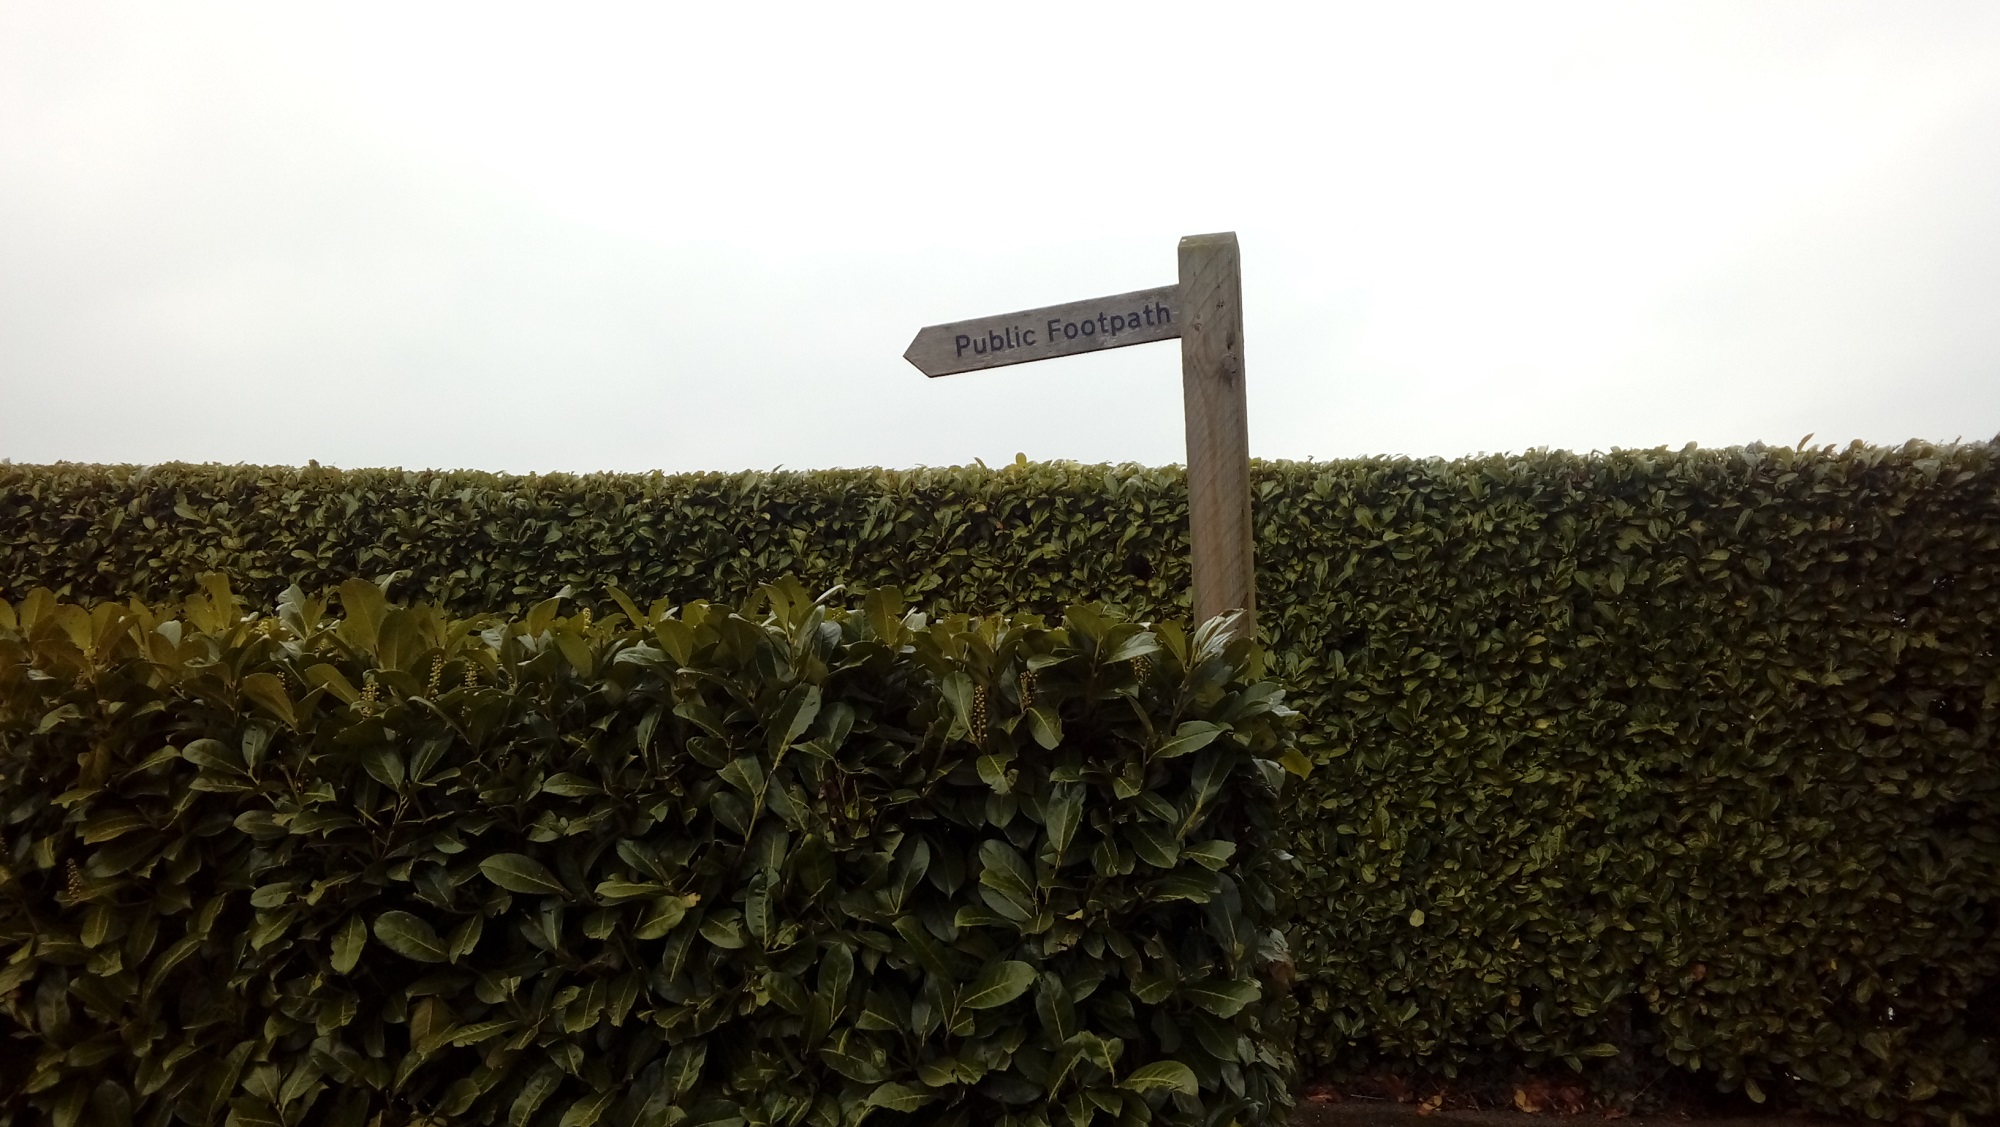 Public footpath sign hedges